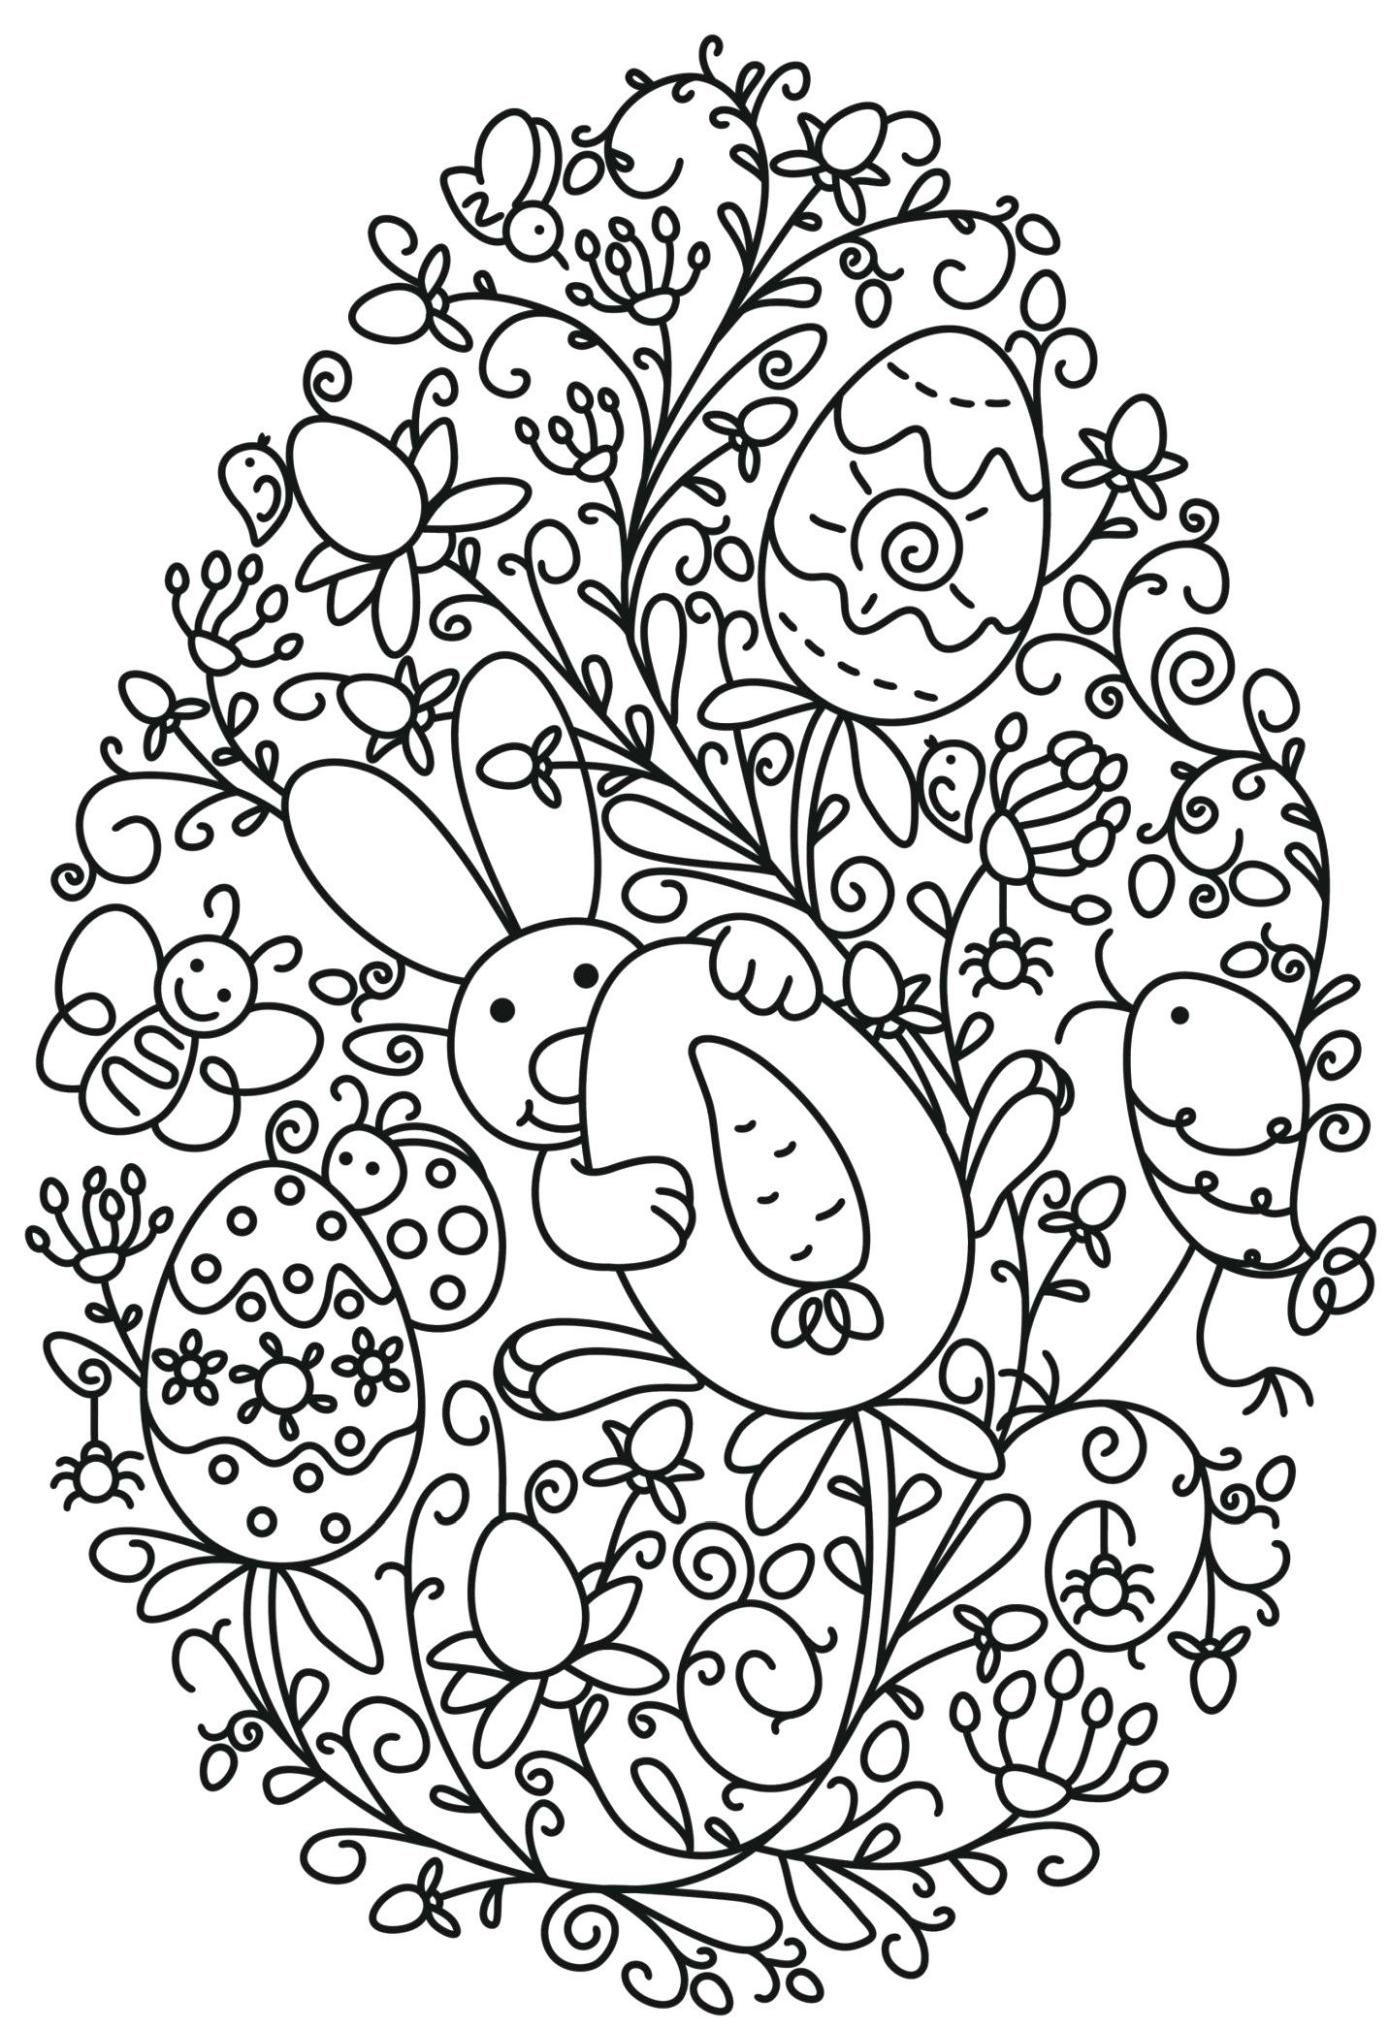 Get This Adult Easter Coloring Pages Funny Easter Bunny Holding an Egg !